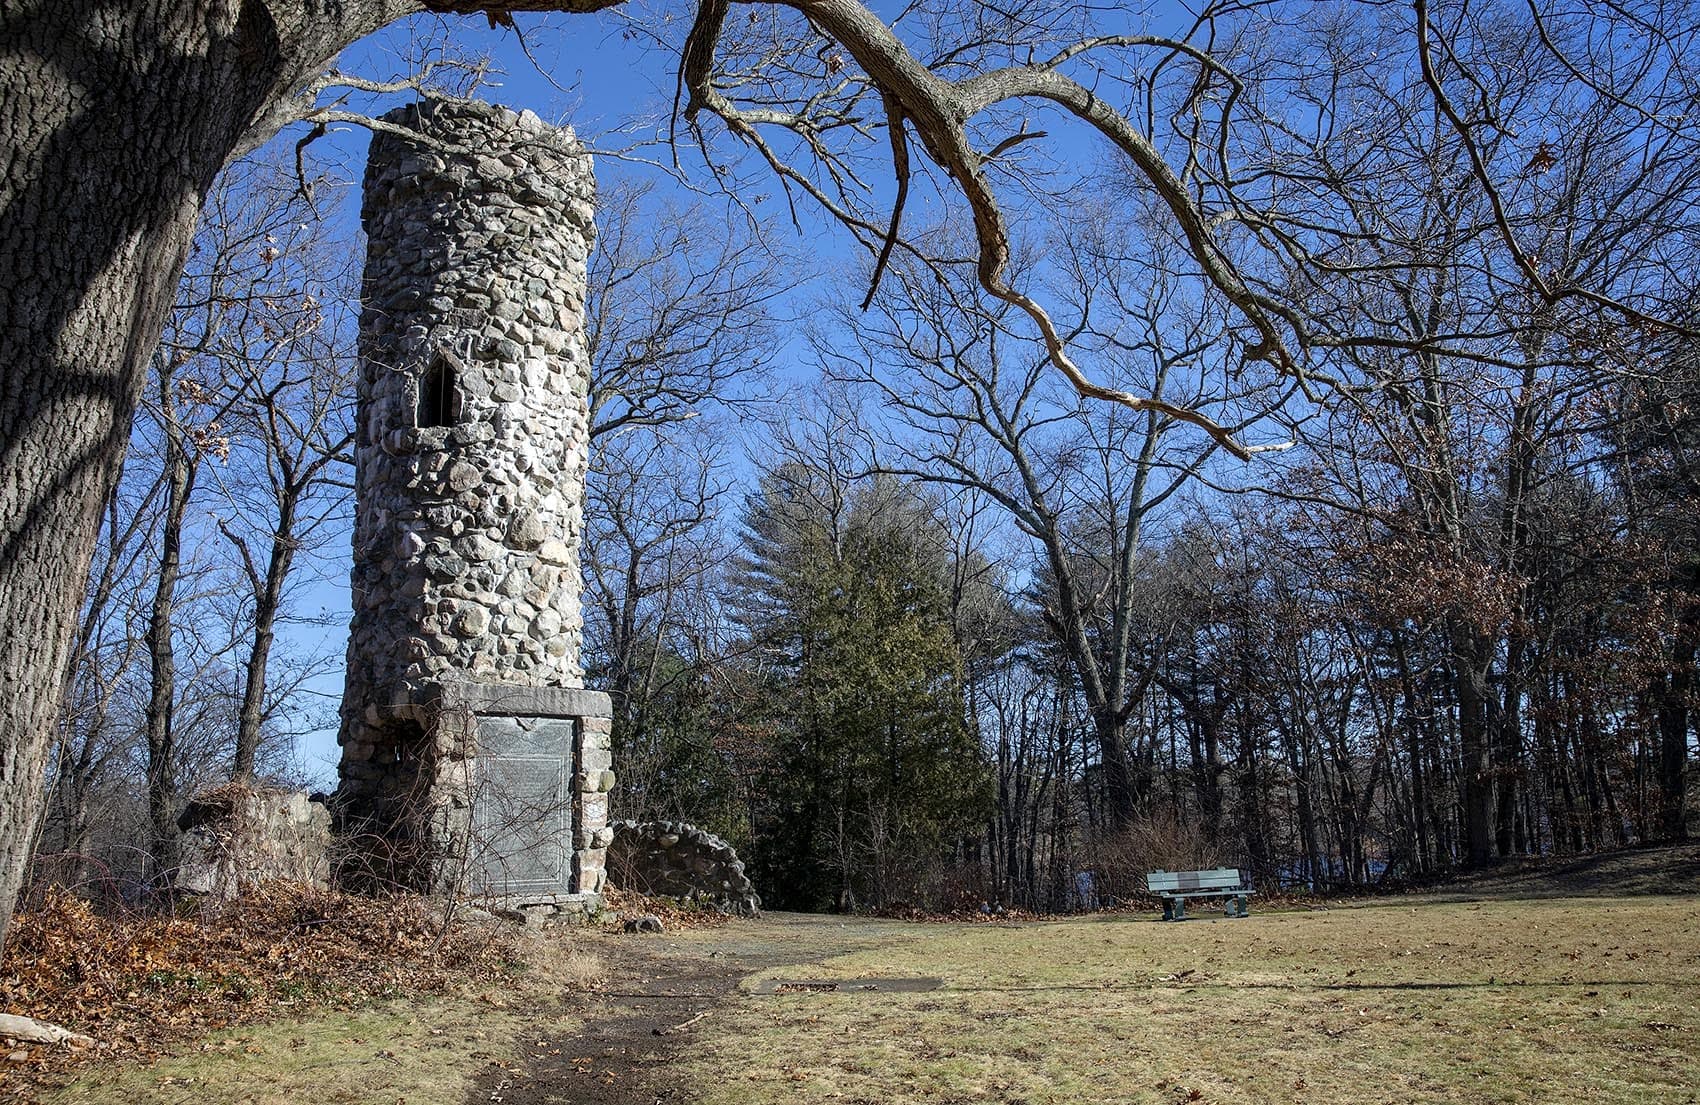 Norumbega Tower, on Norumbega Road in Weston, which mentions the Charles river, “discovered by Leif Erikson, 1000 A.D.” (Robin Lubbock/WBUR)